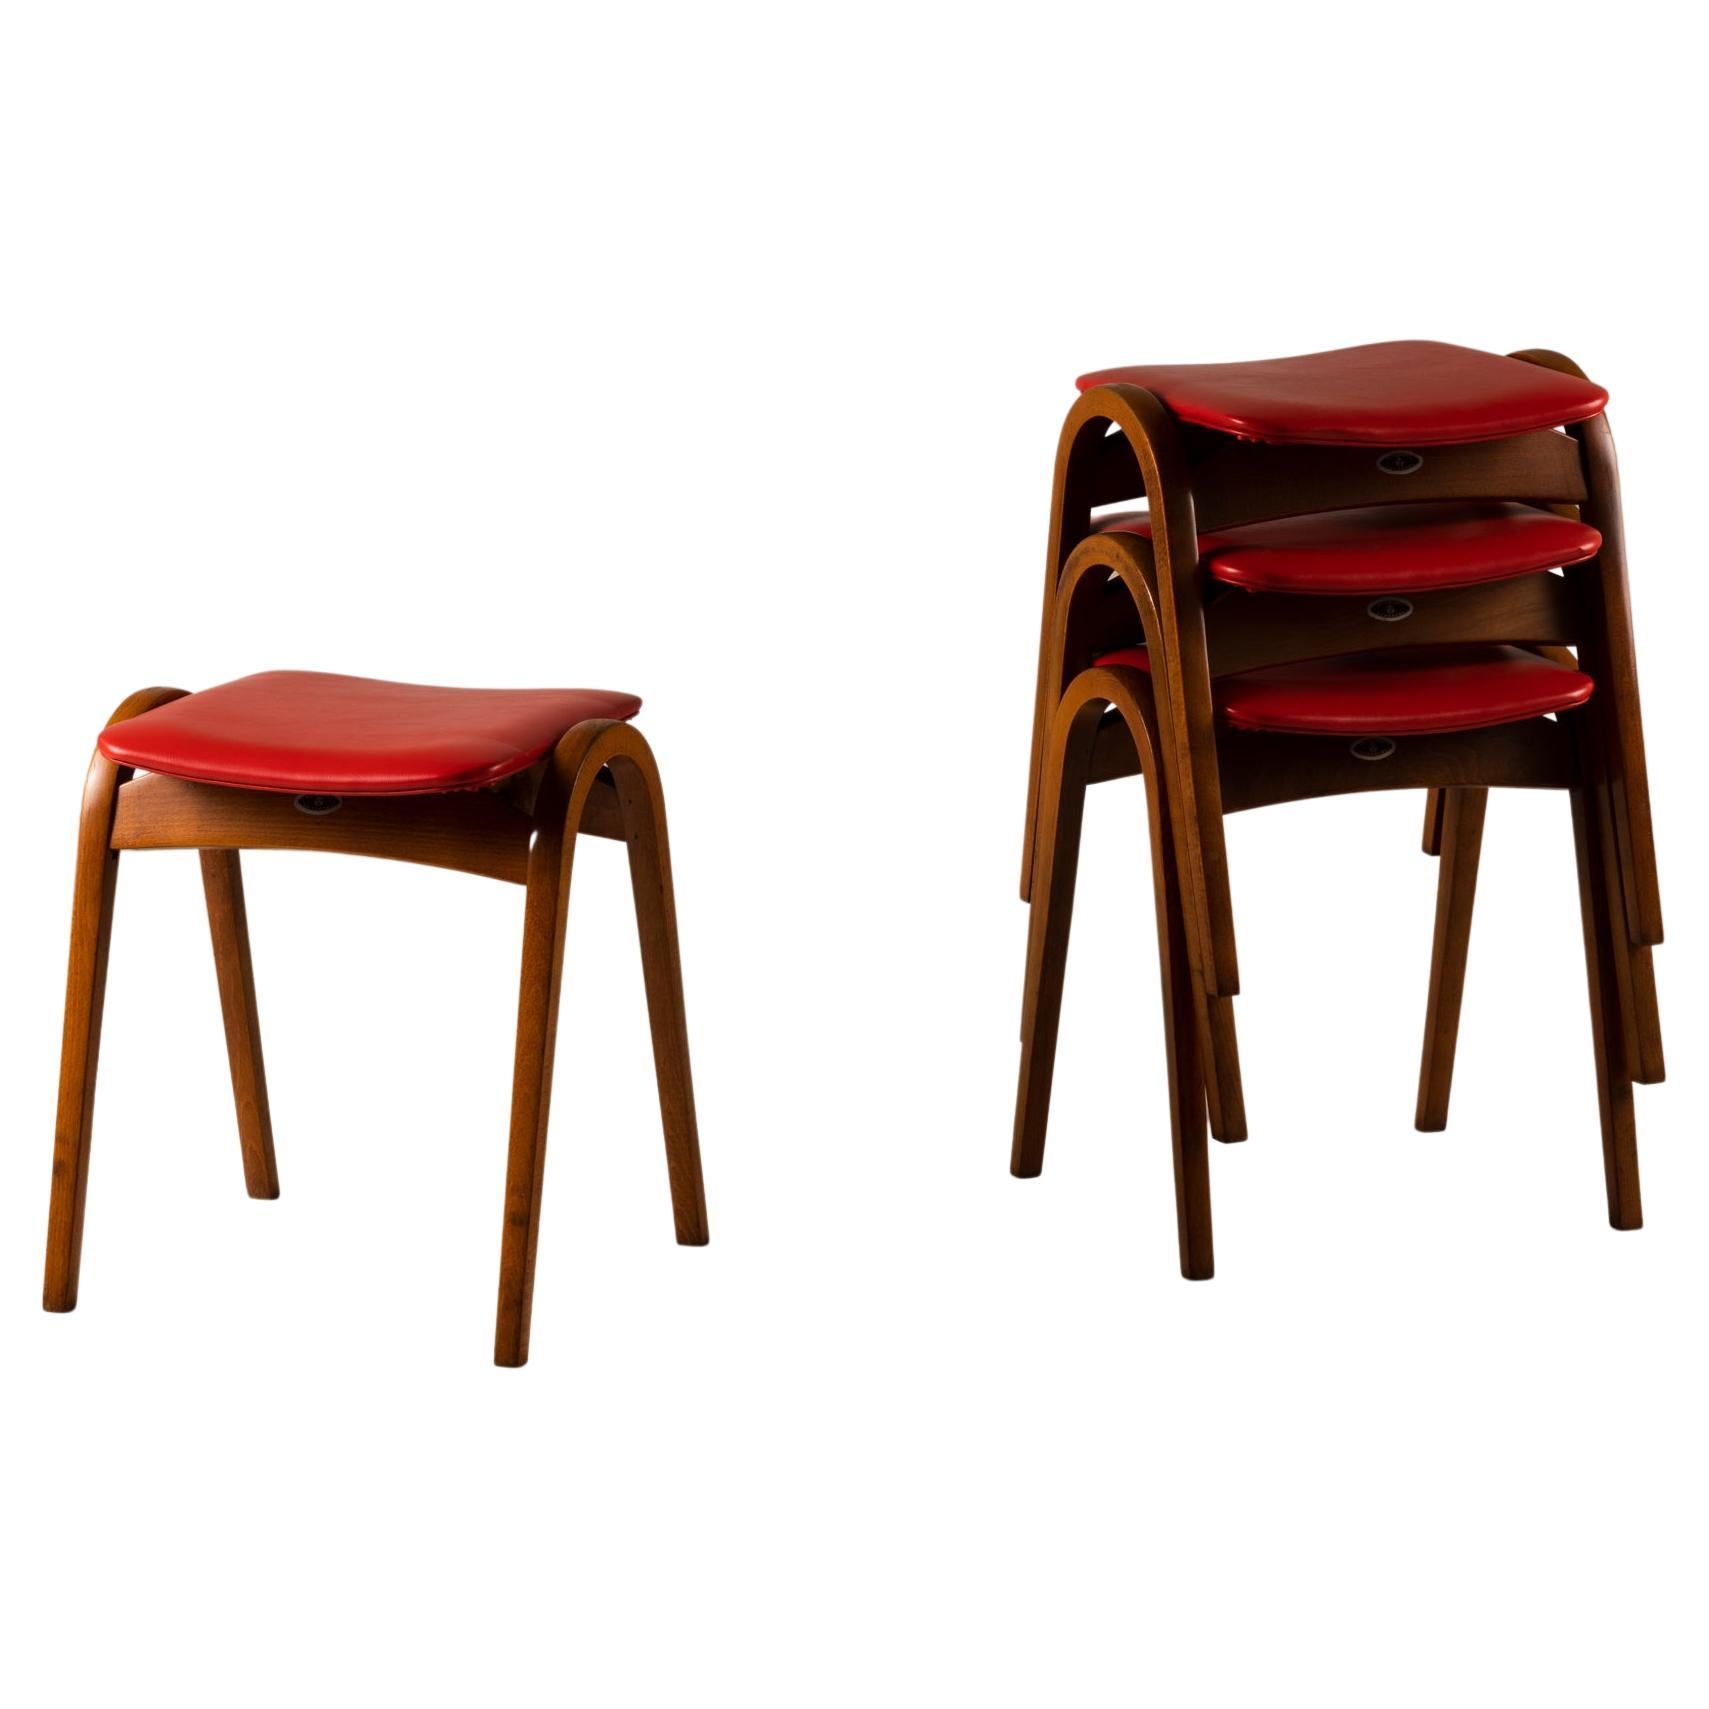 Set of 4 stacking stools by Isamu Kenmochi for Akita Mokko, 1970's For Sale